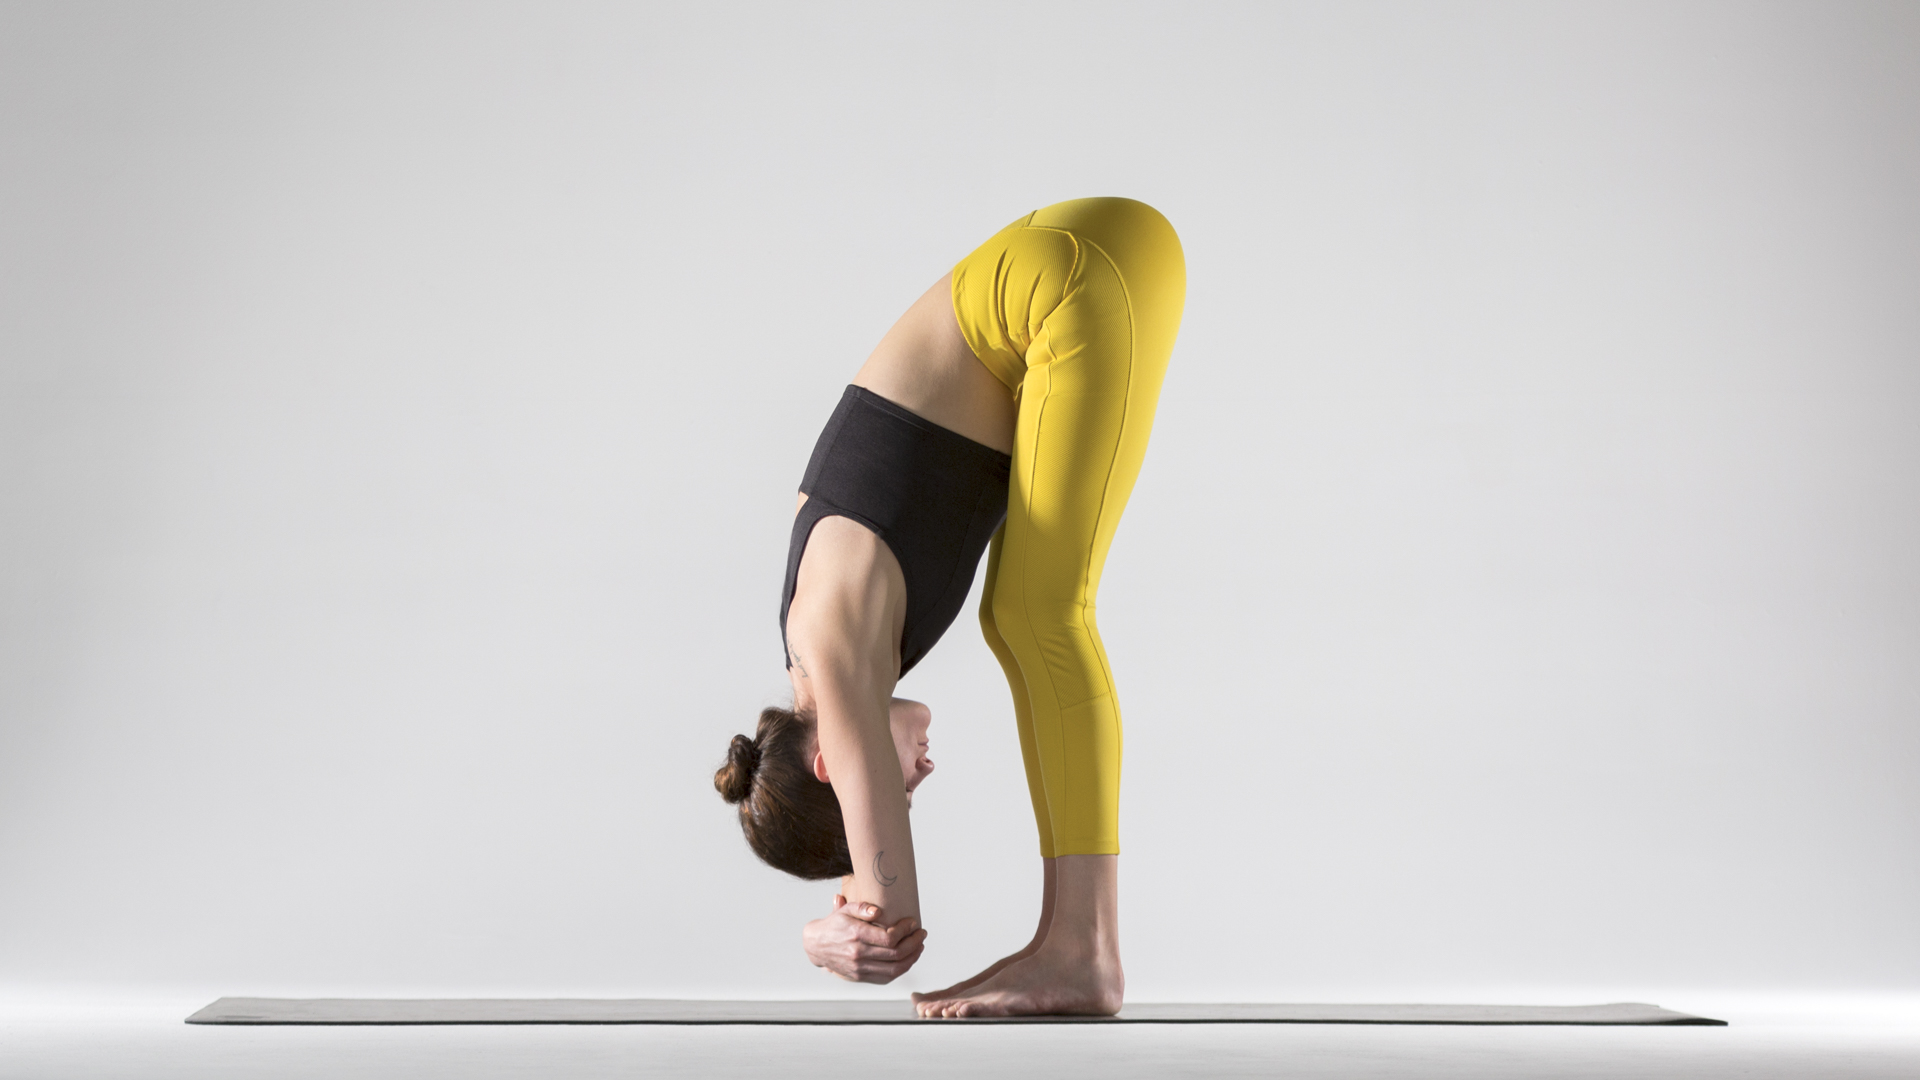 A Yoga Practice That Won't Bear Weight on Hands or Knees